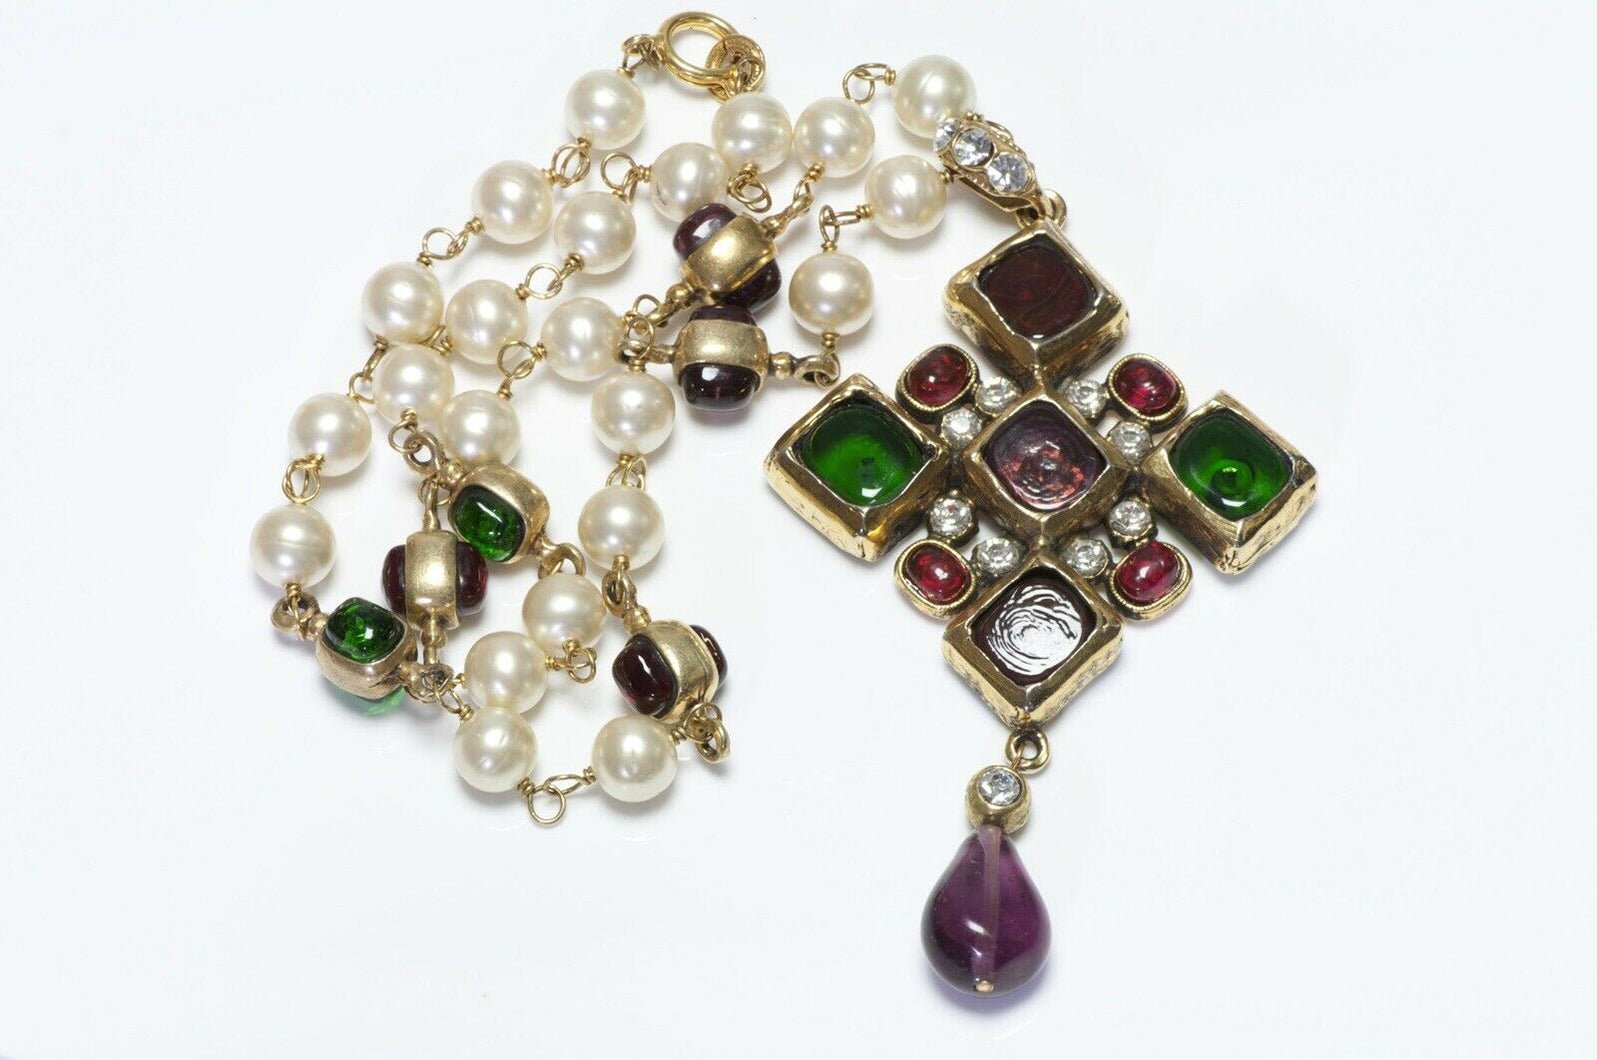 CHANEL 1985 Gripoix Red Green Glass Pearl Pendant Necklace